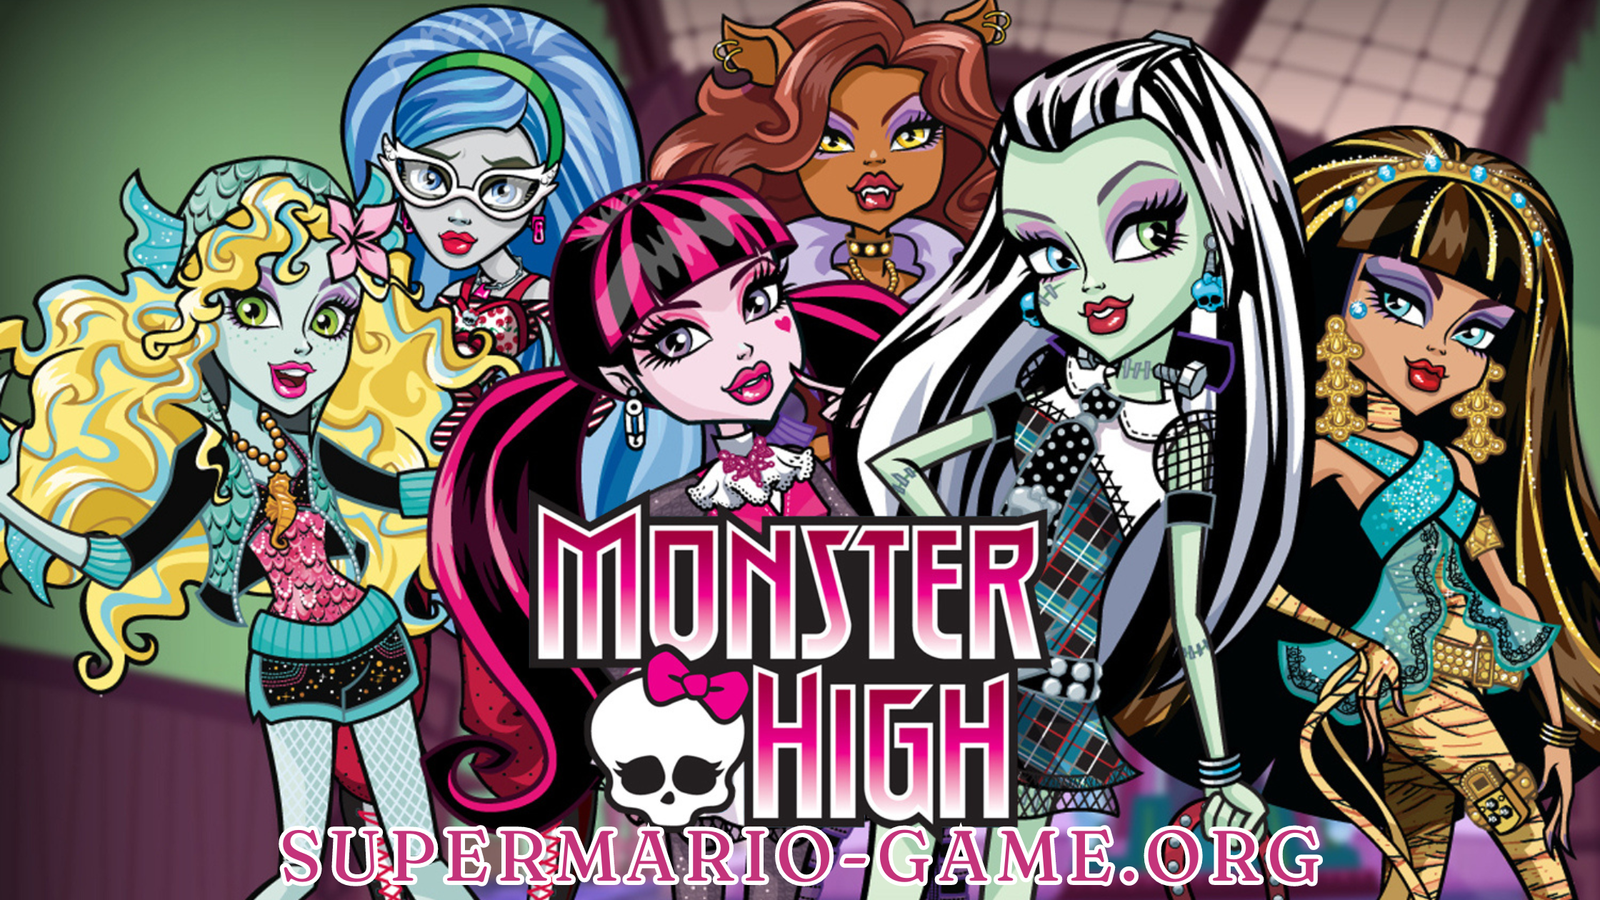 Monster High Characters: An In-Depth Exploration of Their Origins, Traits, and Impact